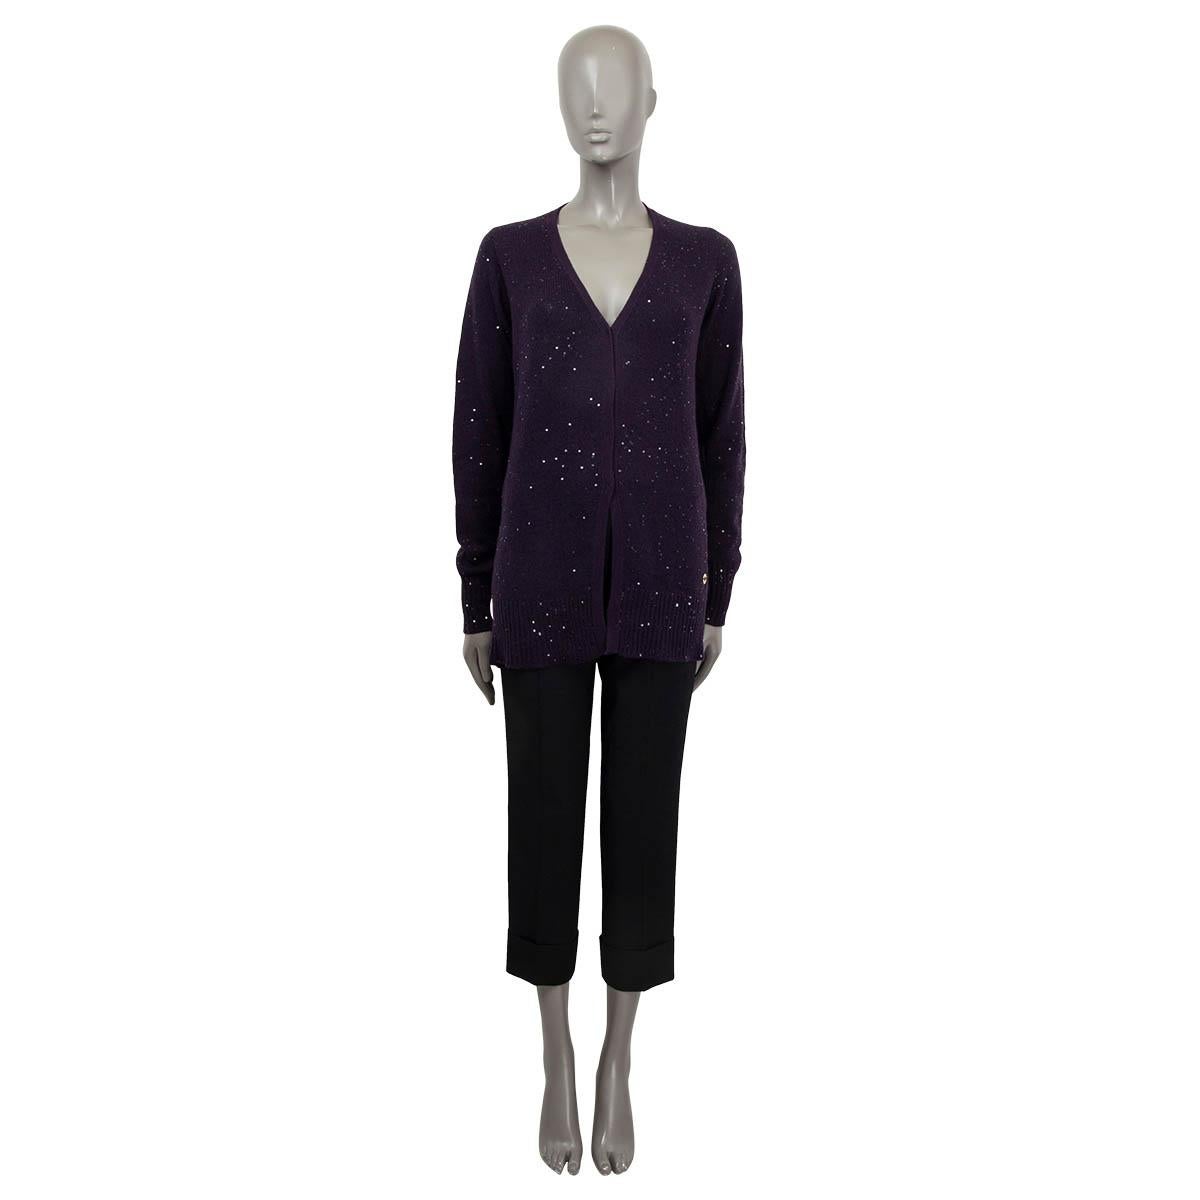 100% authentic Loro Piana sequin embellished cardigan in purple cashmere (93%) and cotton (9%). Features a v-neck and opens with concealed buttons on the front. Has been worn and is in excellent condition. Matching top available in separate listing.